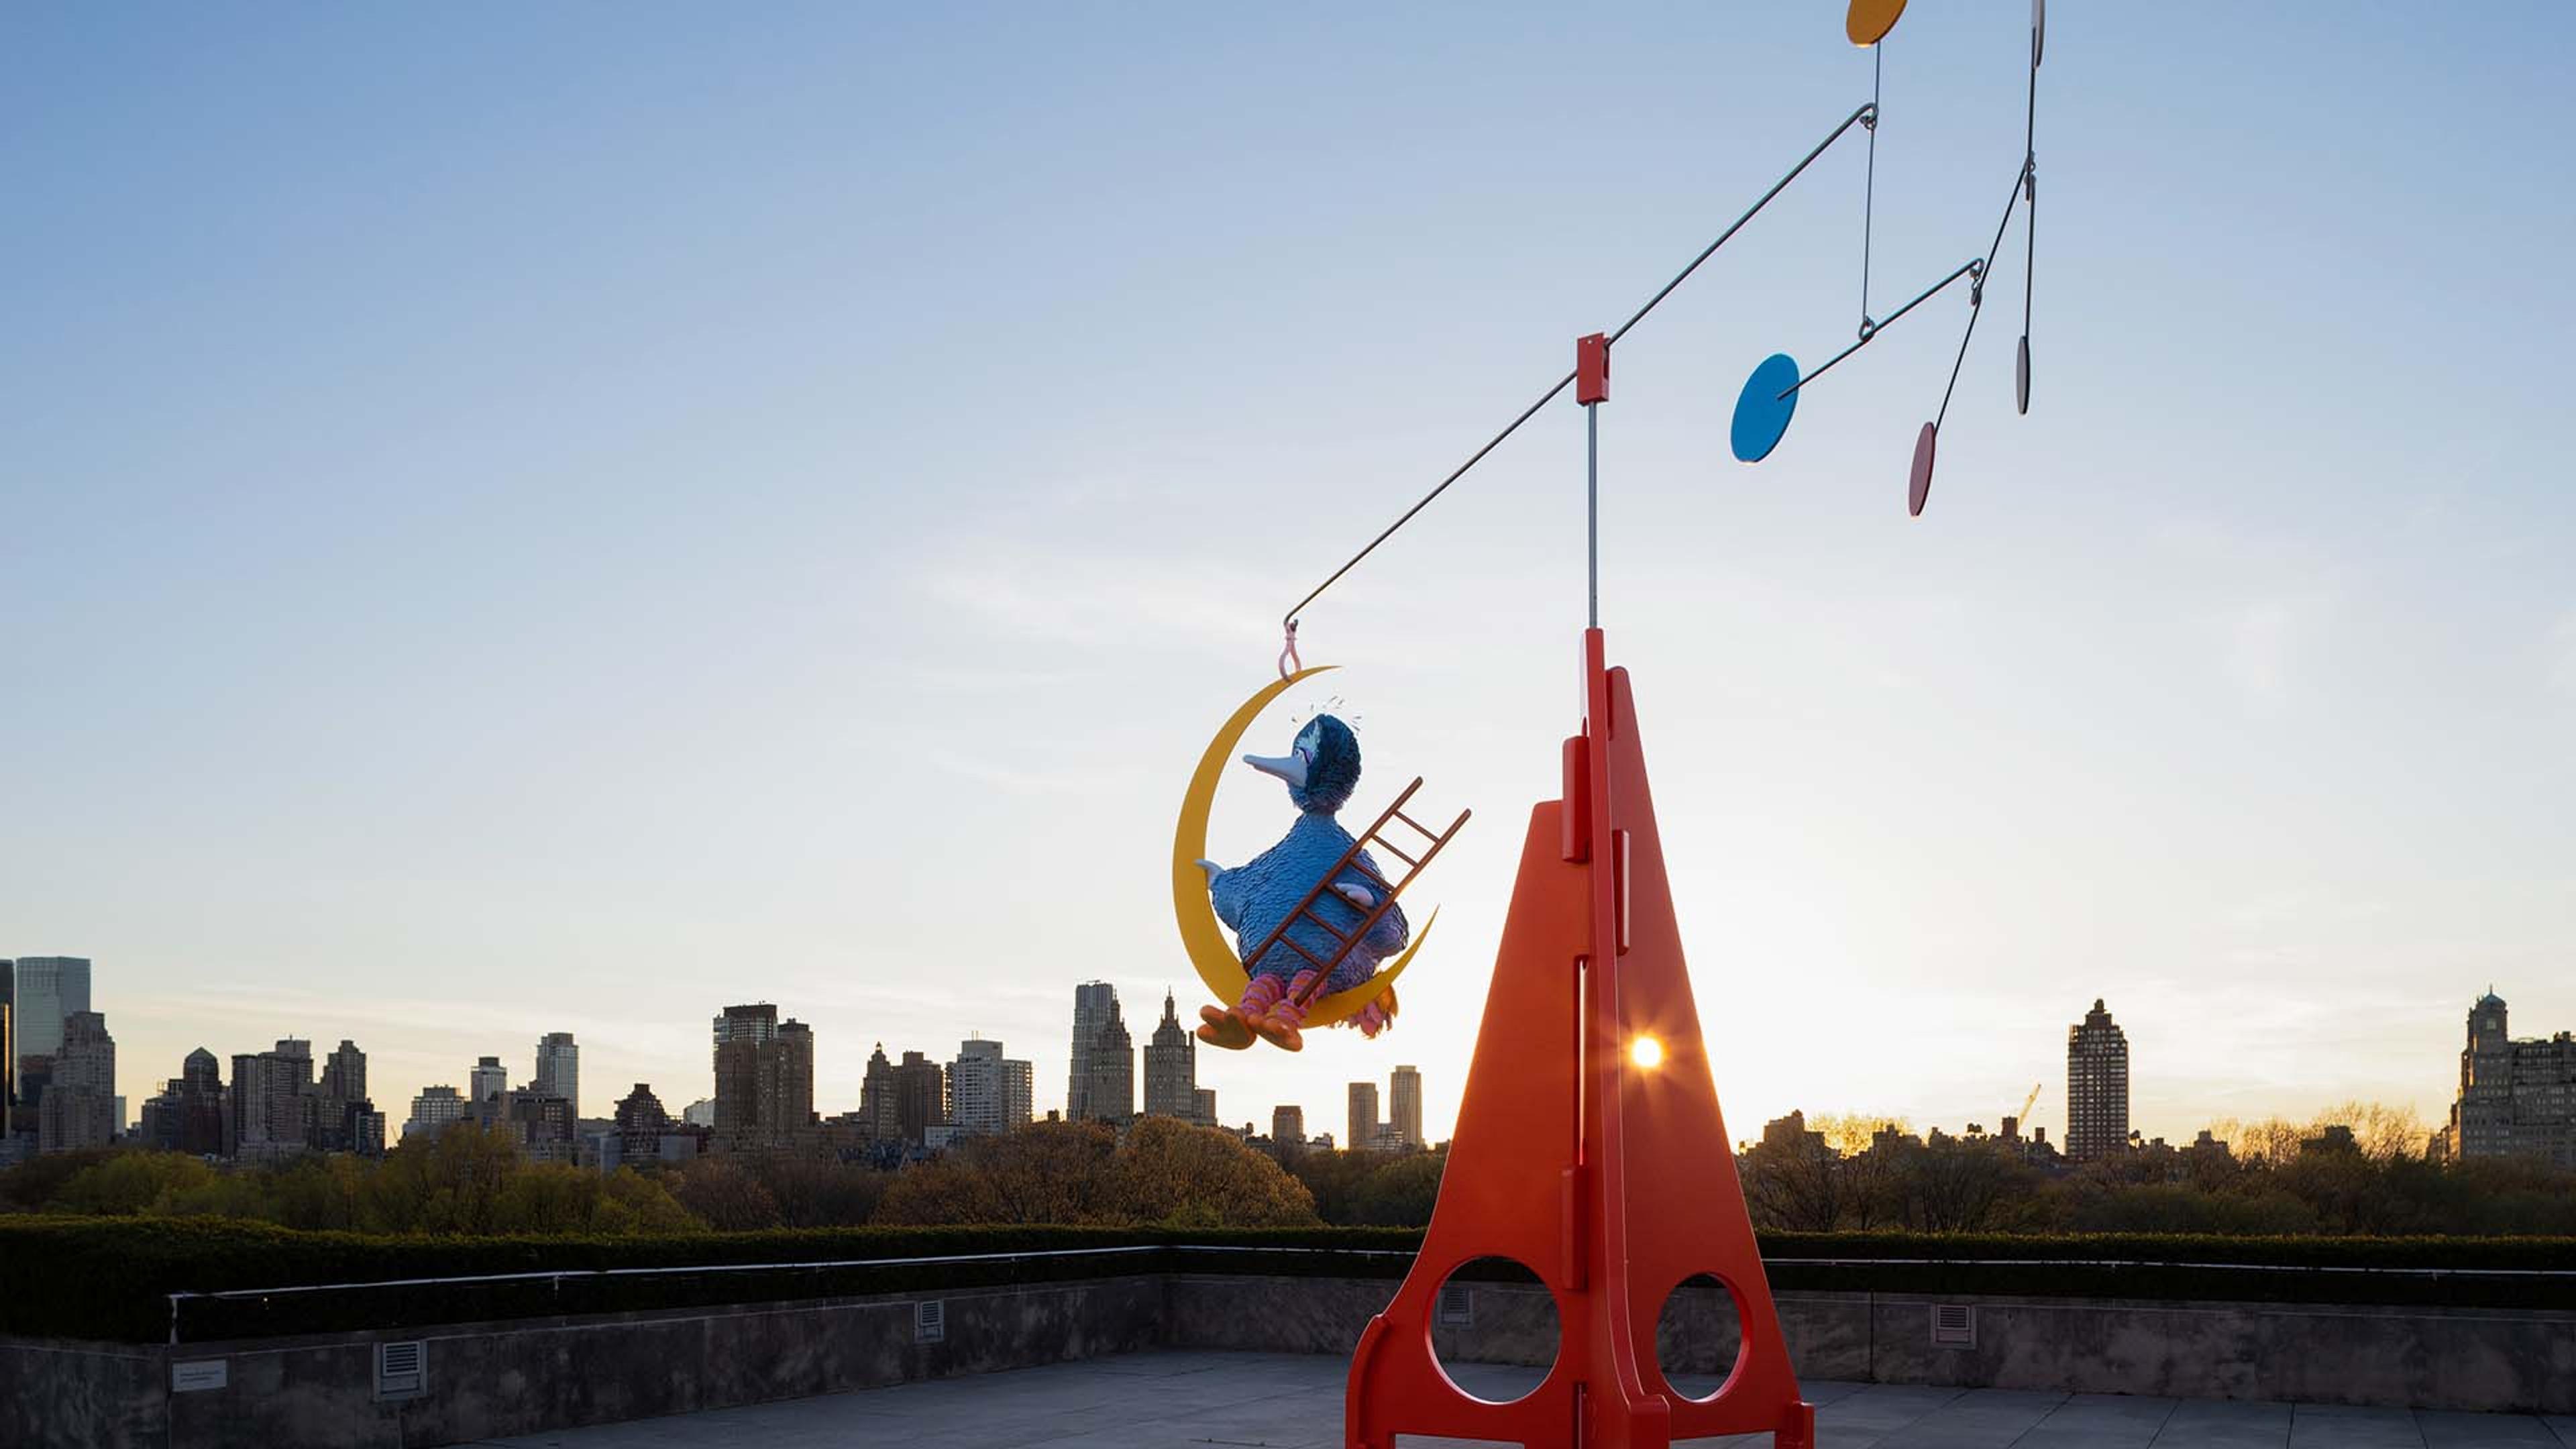 Brightly colored stainless steel, aluminum and fiberglass installation, depicting Sesame Street’s Big Bird swinging on a crescent moon, with the New York skyline on the background. 